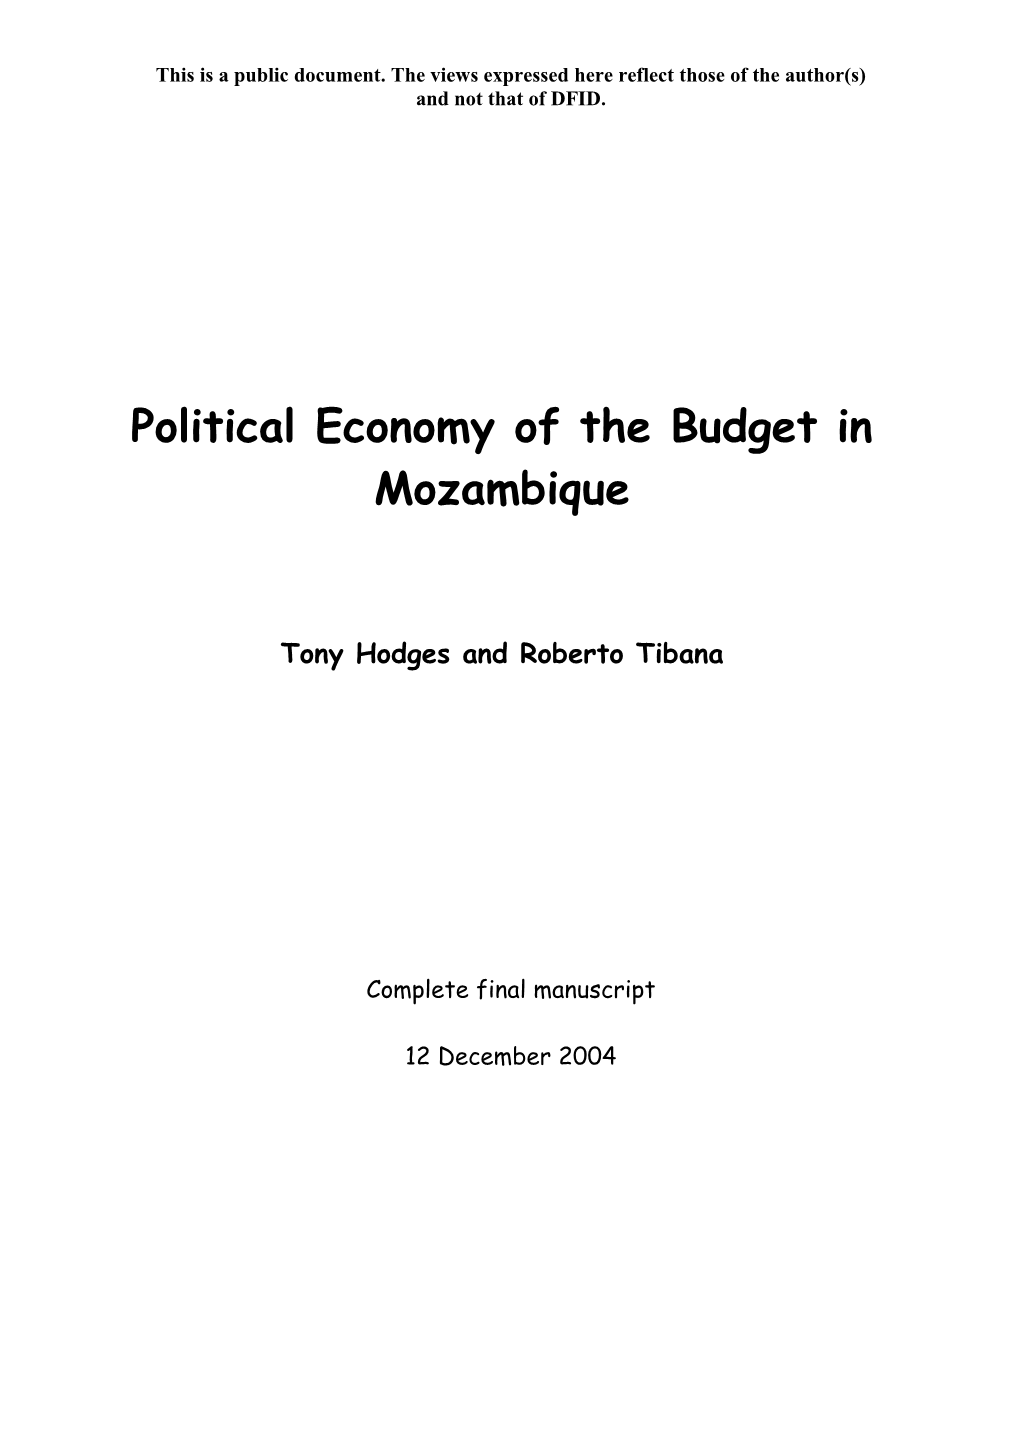 What Drives the Budget Process in Mozambique